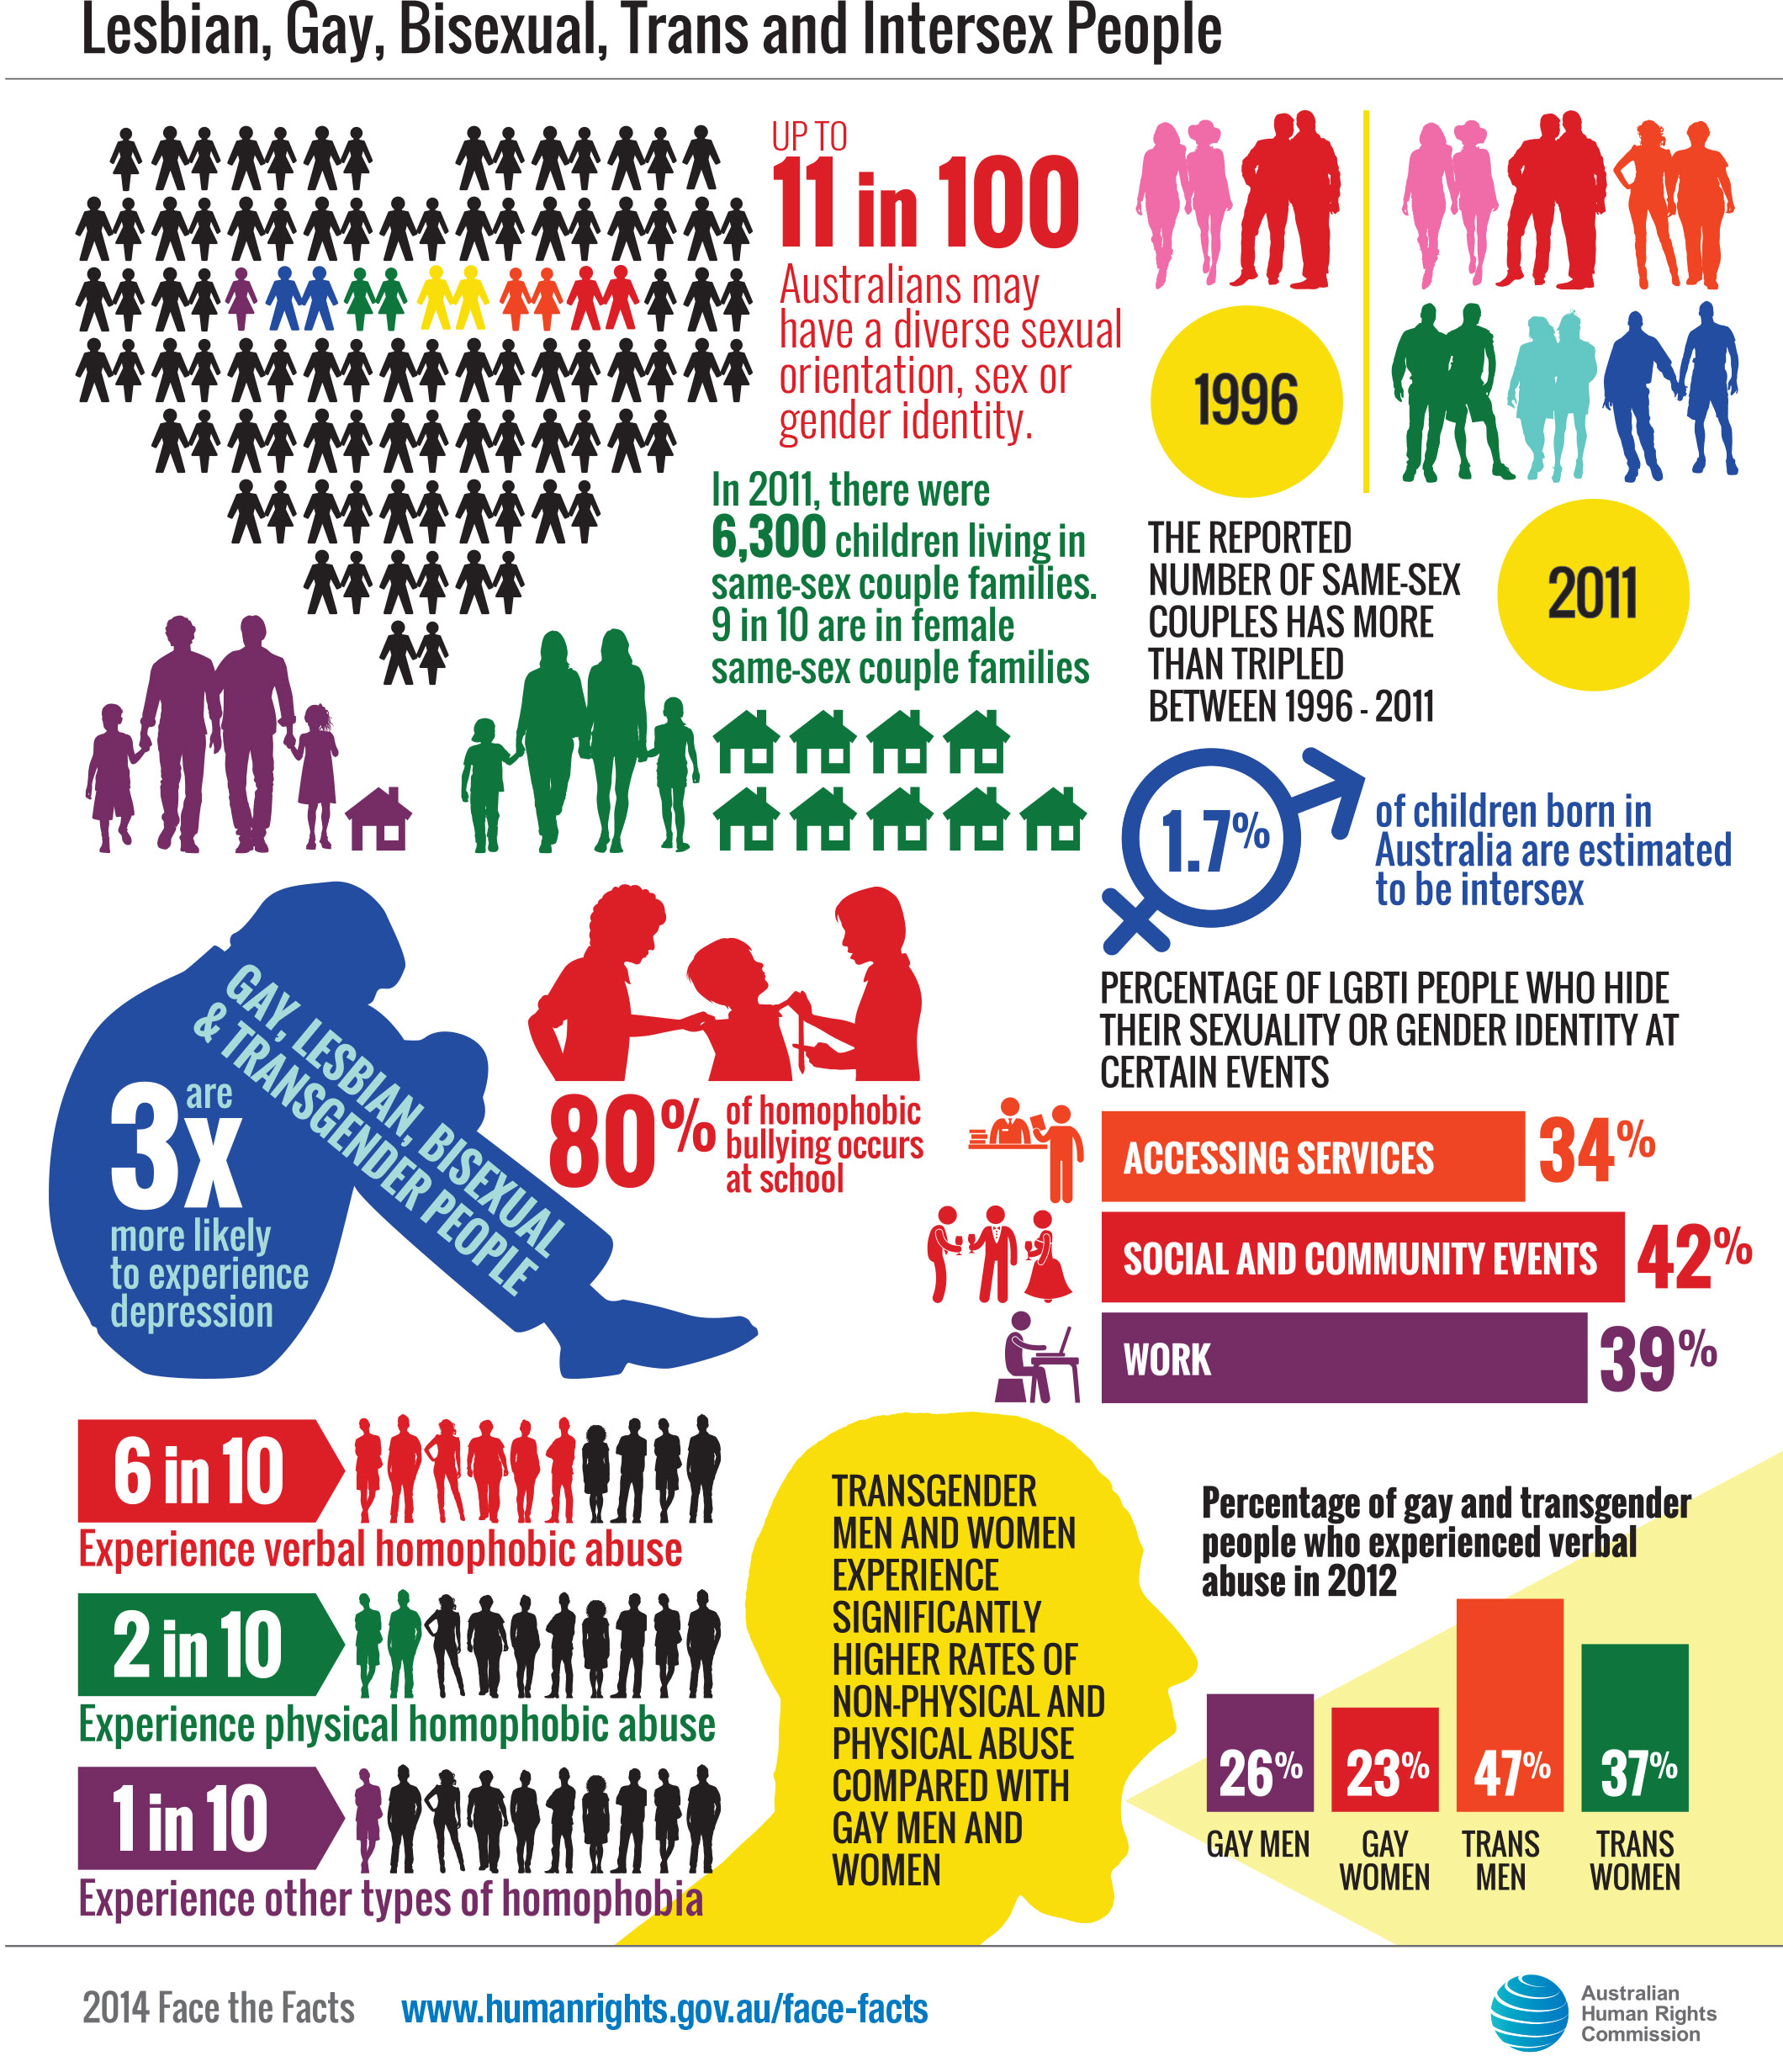 Face the facts lesbian, gay, bisexual, trans and intersex people statistics|2120x2463